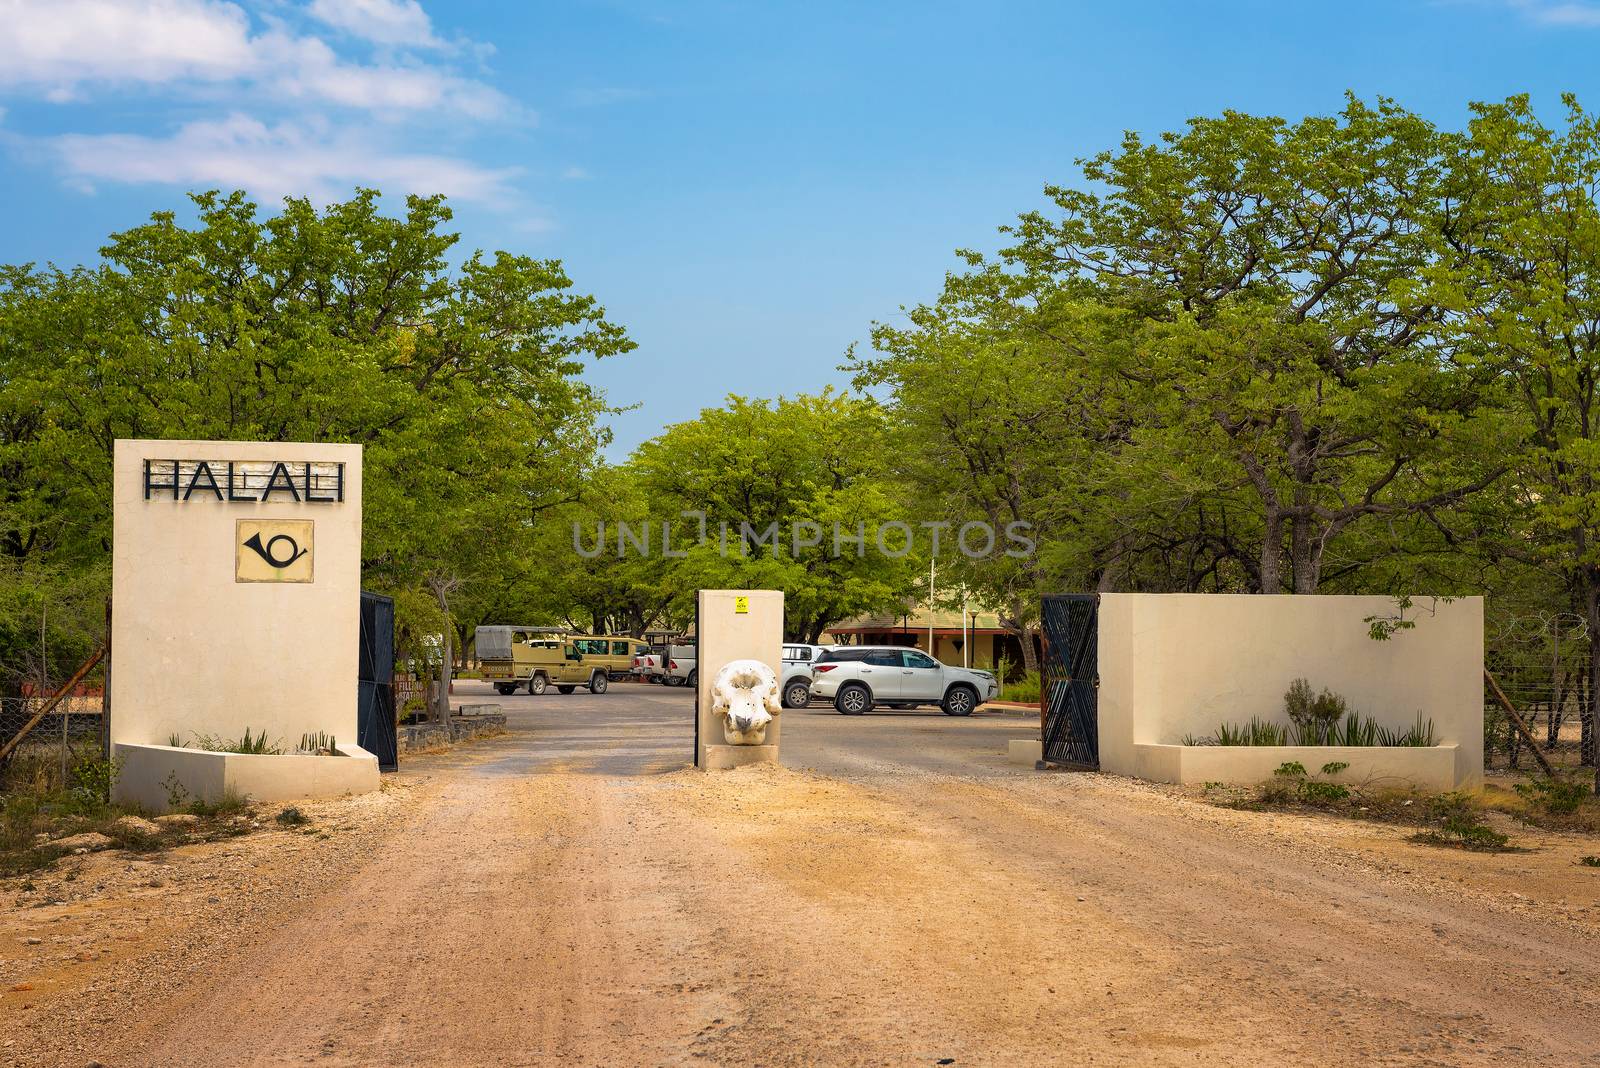 Okaukuejo, Namibia - April 3, 2019 : Entry gate of the Halali resort and campsite in Etosha National Park with an elephant skull at the entrance.